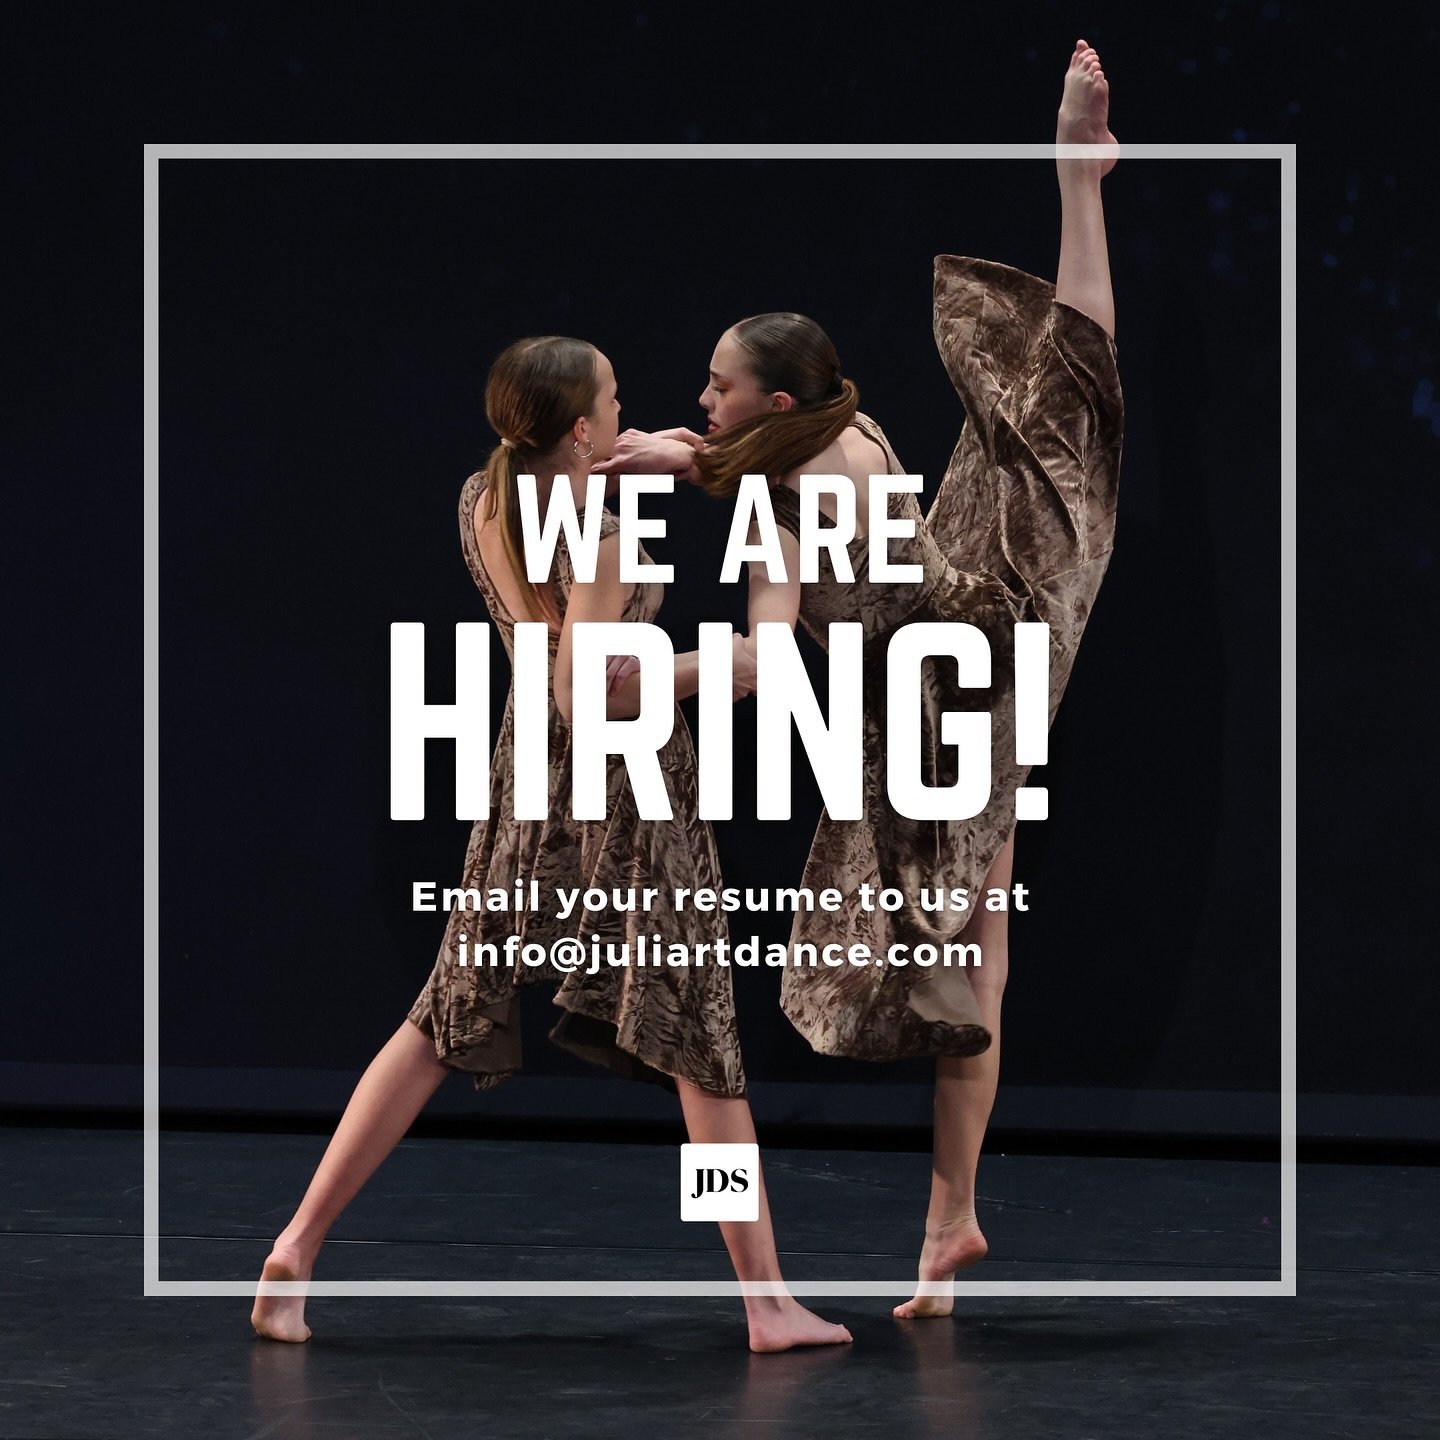 We&rsquo;re hiring! ✨

Interested in joining the Juliart fam!? Send your resume over to info@juliartdance.com - We&rsquo;d love to chat with you!
&bull;
&bull;
&bull;
#juliartdancestudio #juliartdance #hiringdanceteachers #danceteacherhiring #hiringd